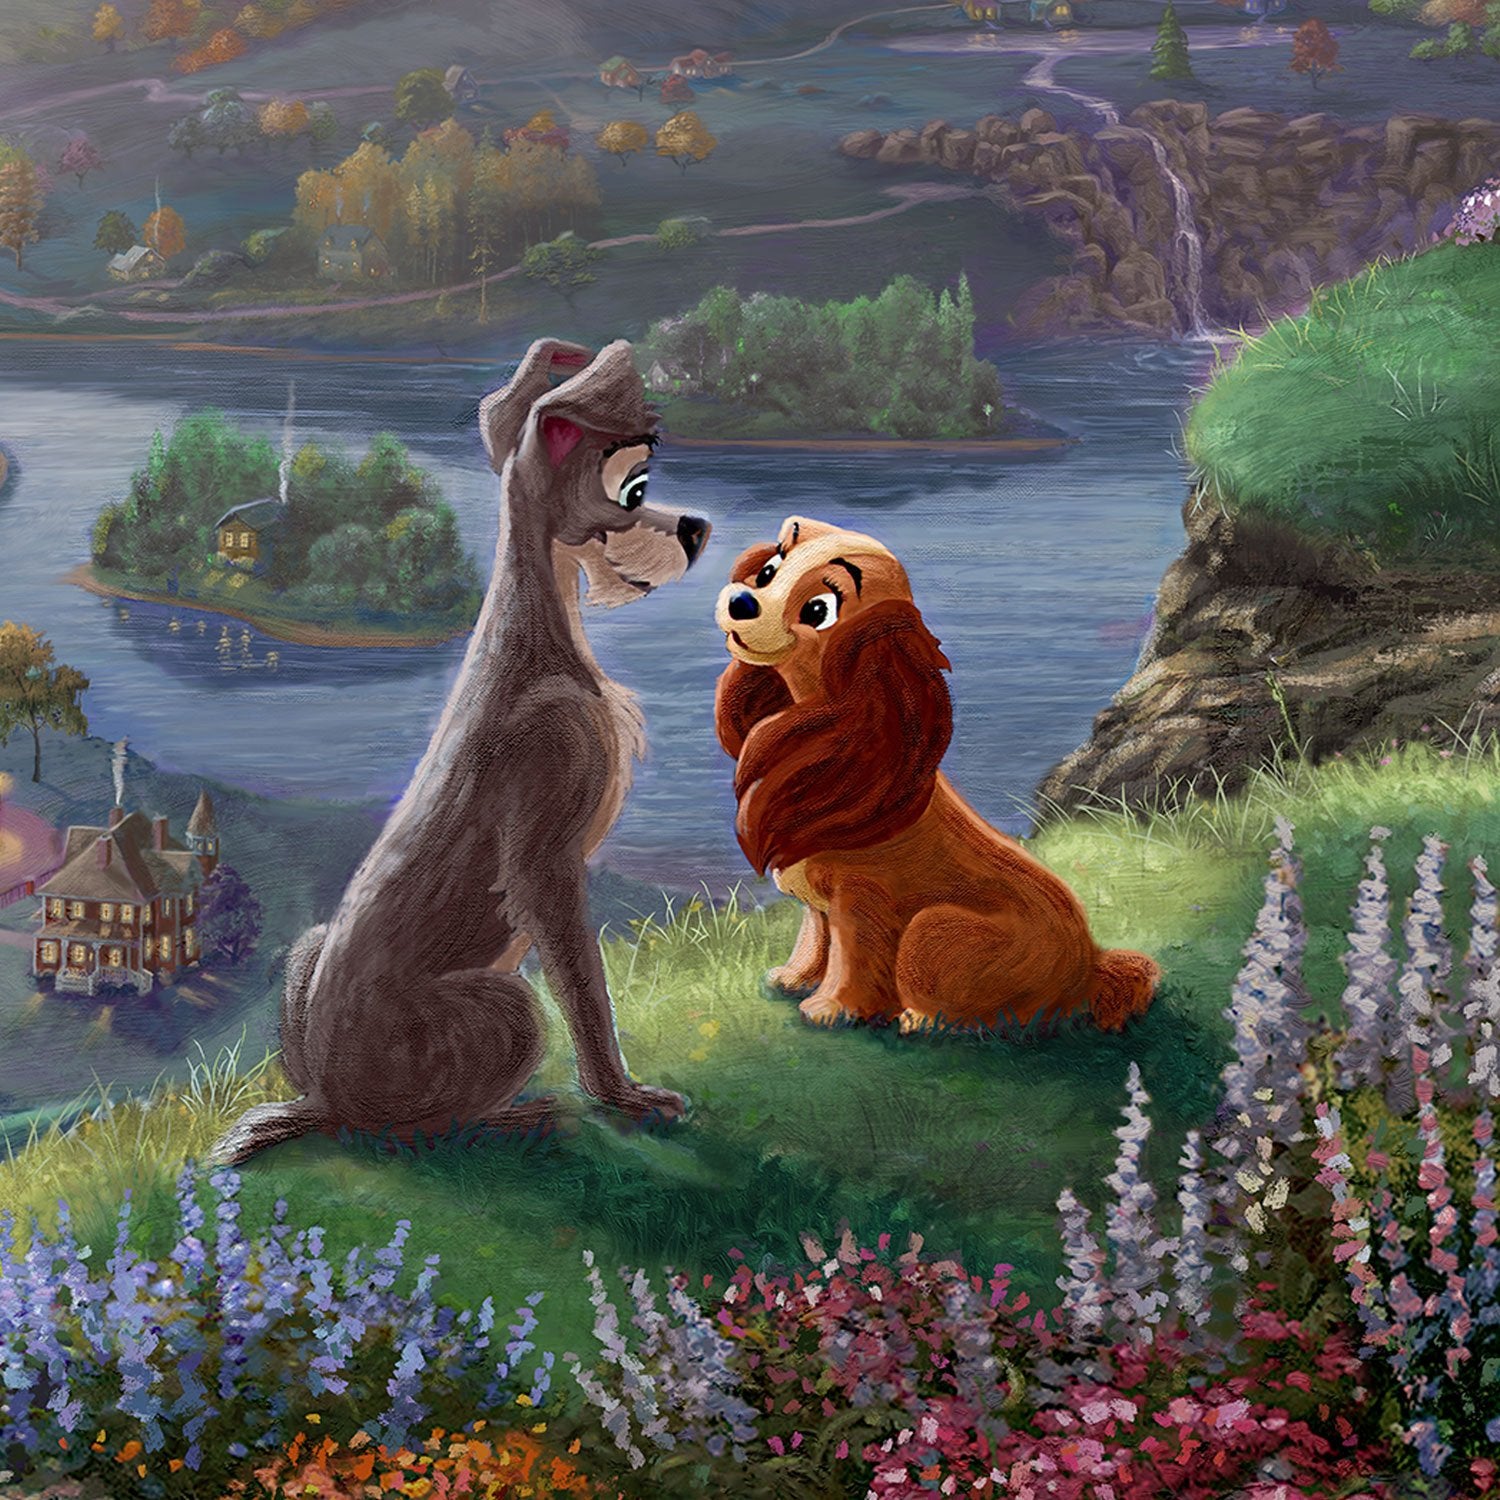 Lady and the Tramp sit gazing into each other’s eyes and falling-in-love, they are seemingly unaware of the world around them - closeup